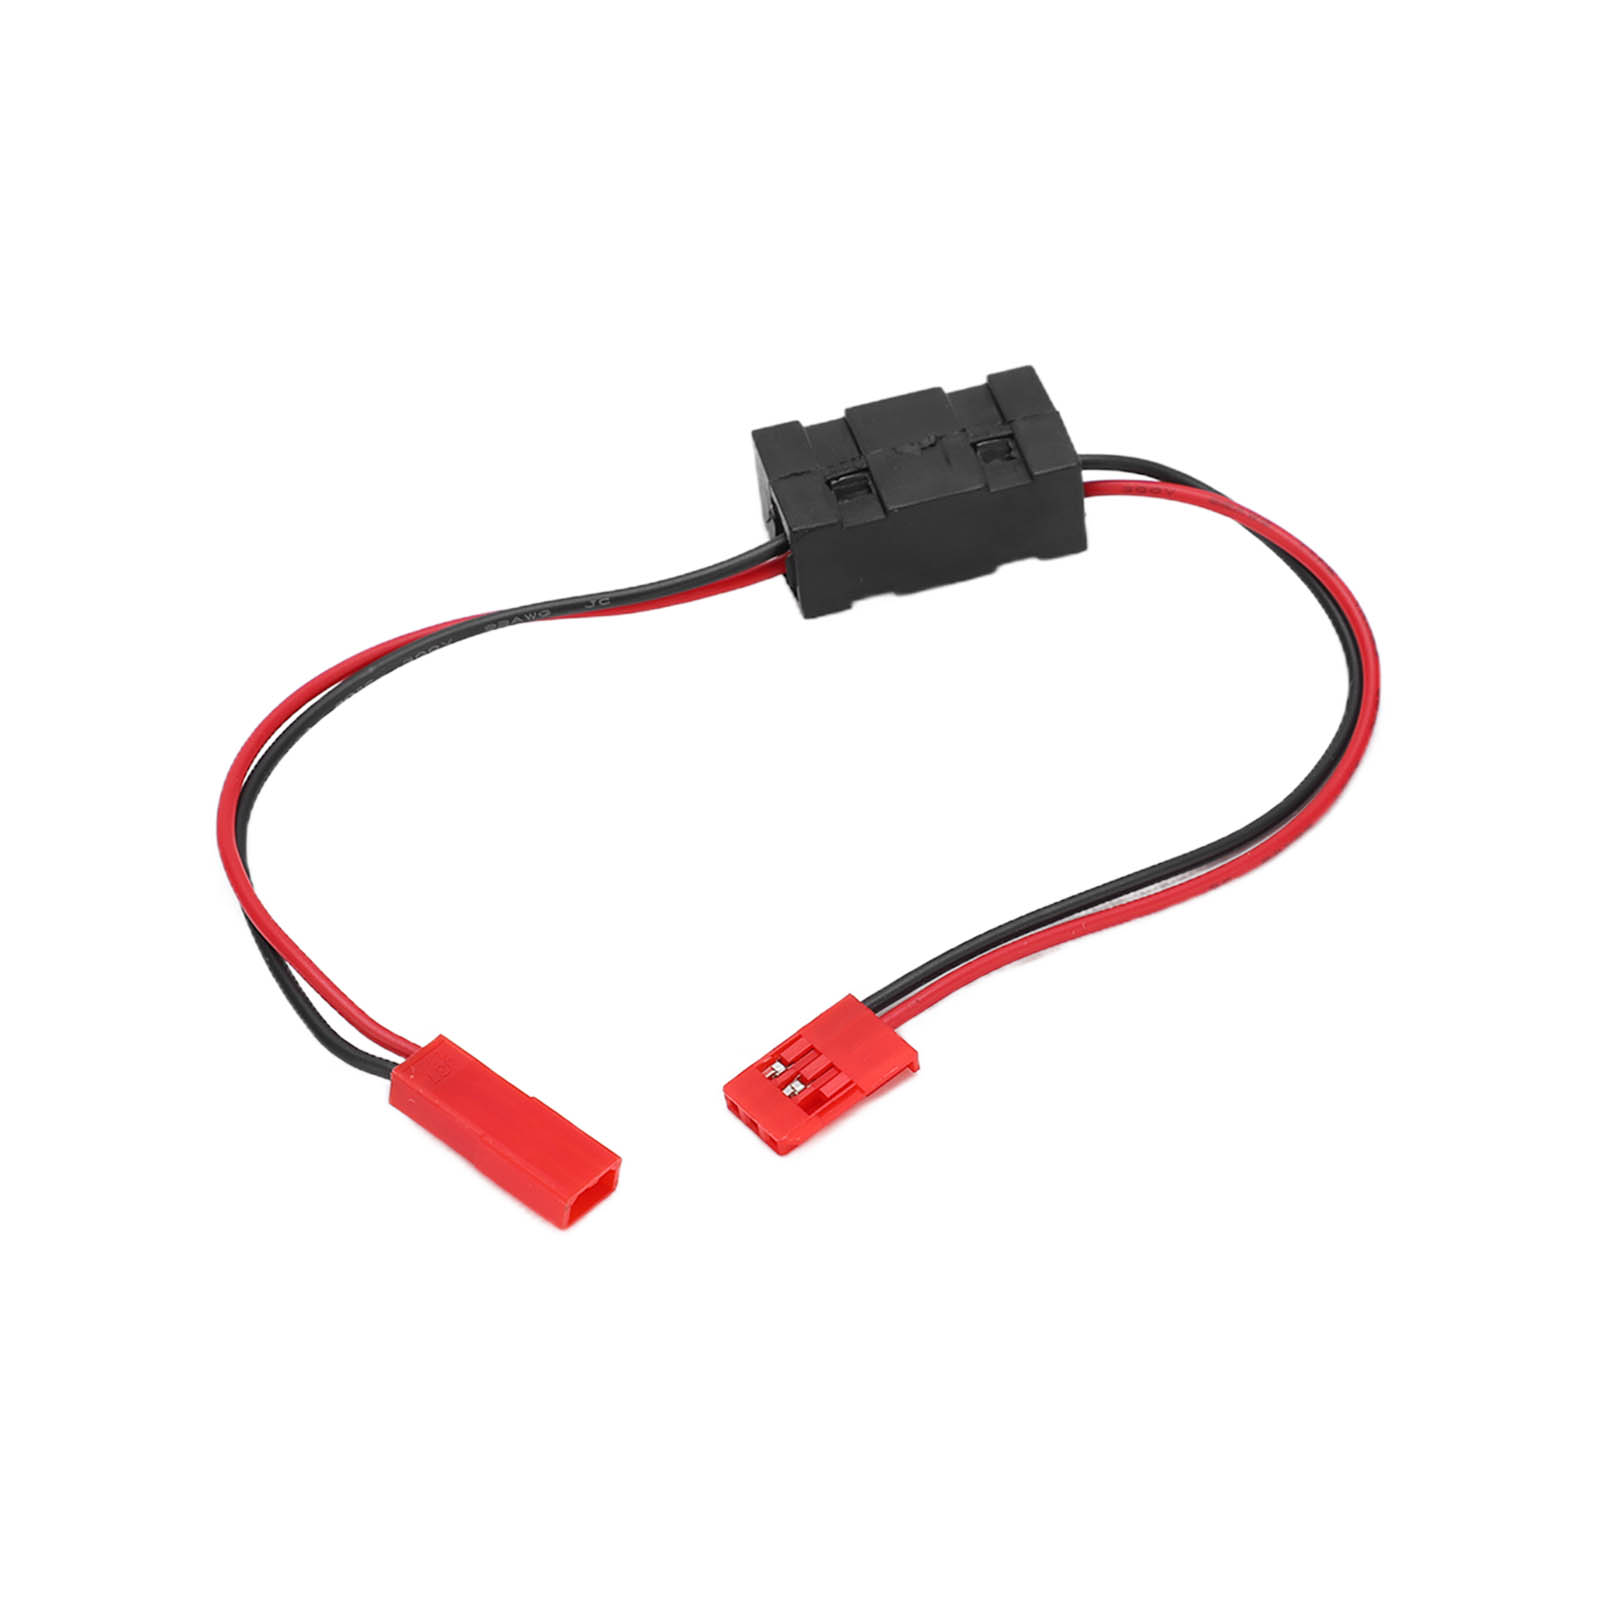 FAGINEY JST RC On Off Switch For RC Car Light,RC Car LED Light Control  Switch JST Plug Power On Off Switches Receiver For Remote Control Car,JST  RC On Off Switch Walmart